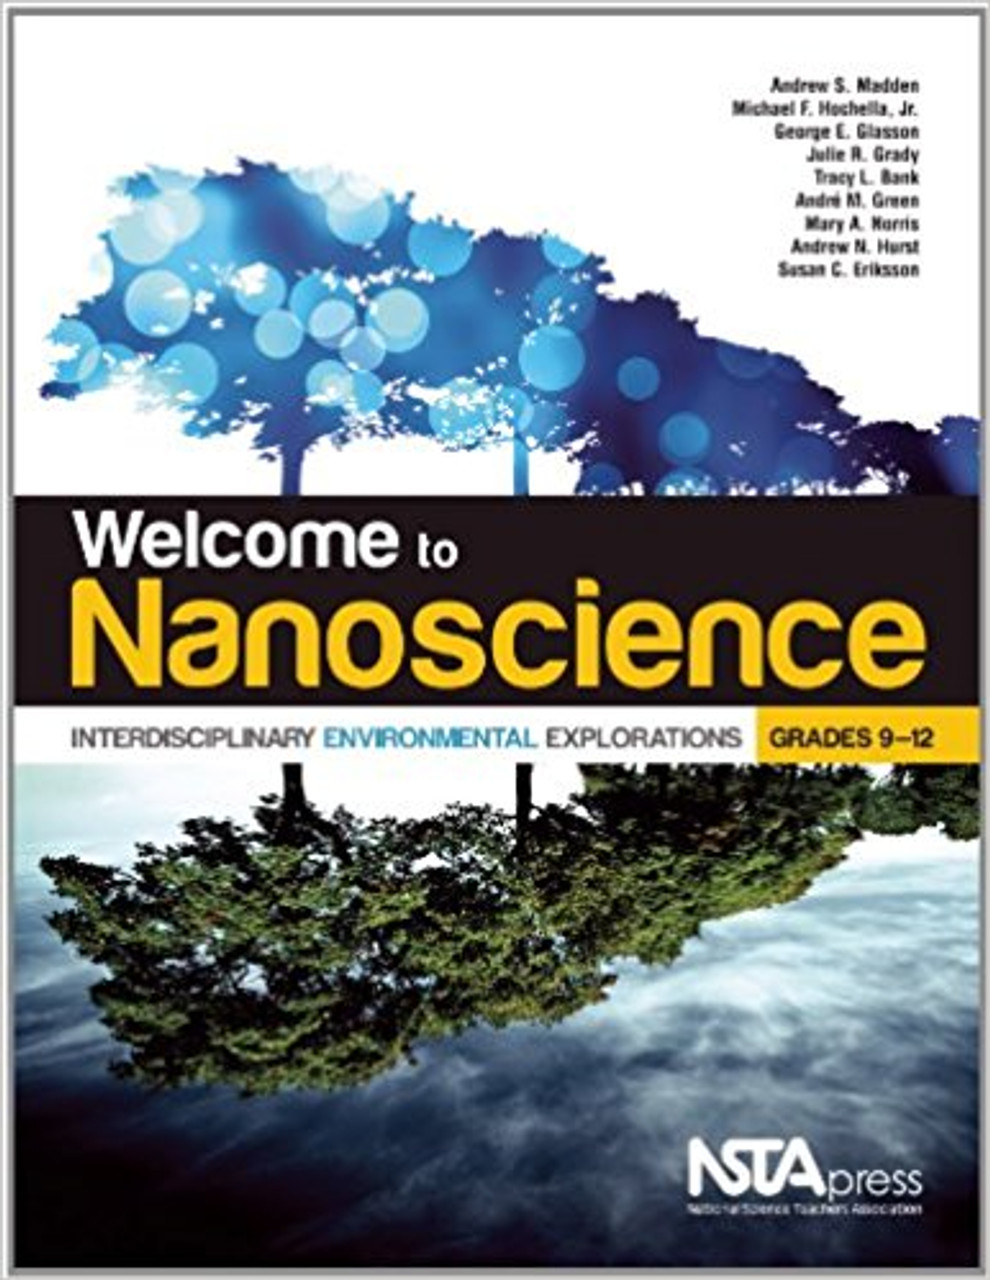 Welcome to Nanoscience: Interdisciplinary Environmental Explorations, 9-12 by Andrew S Madden